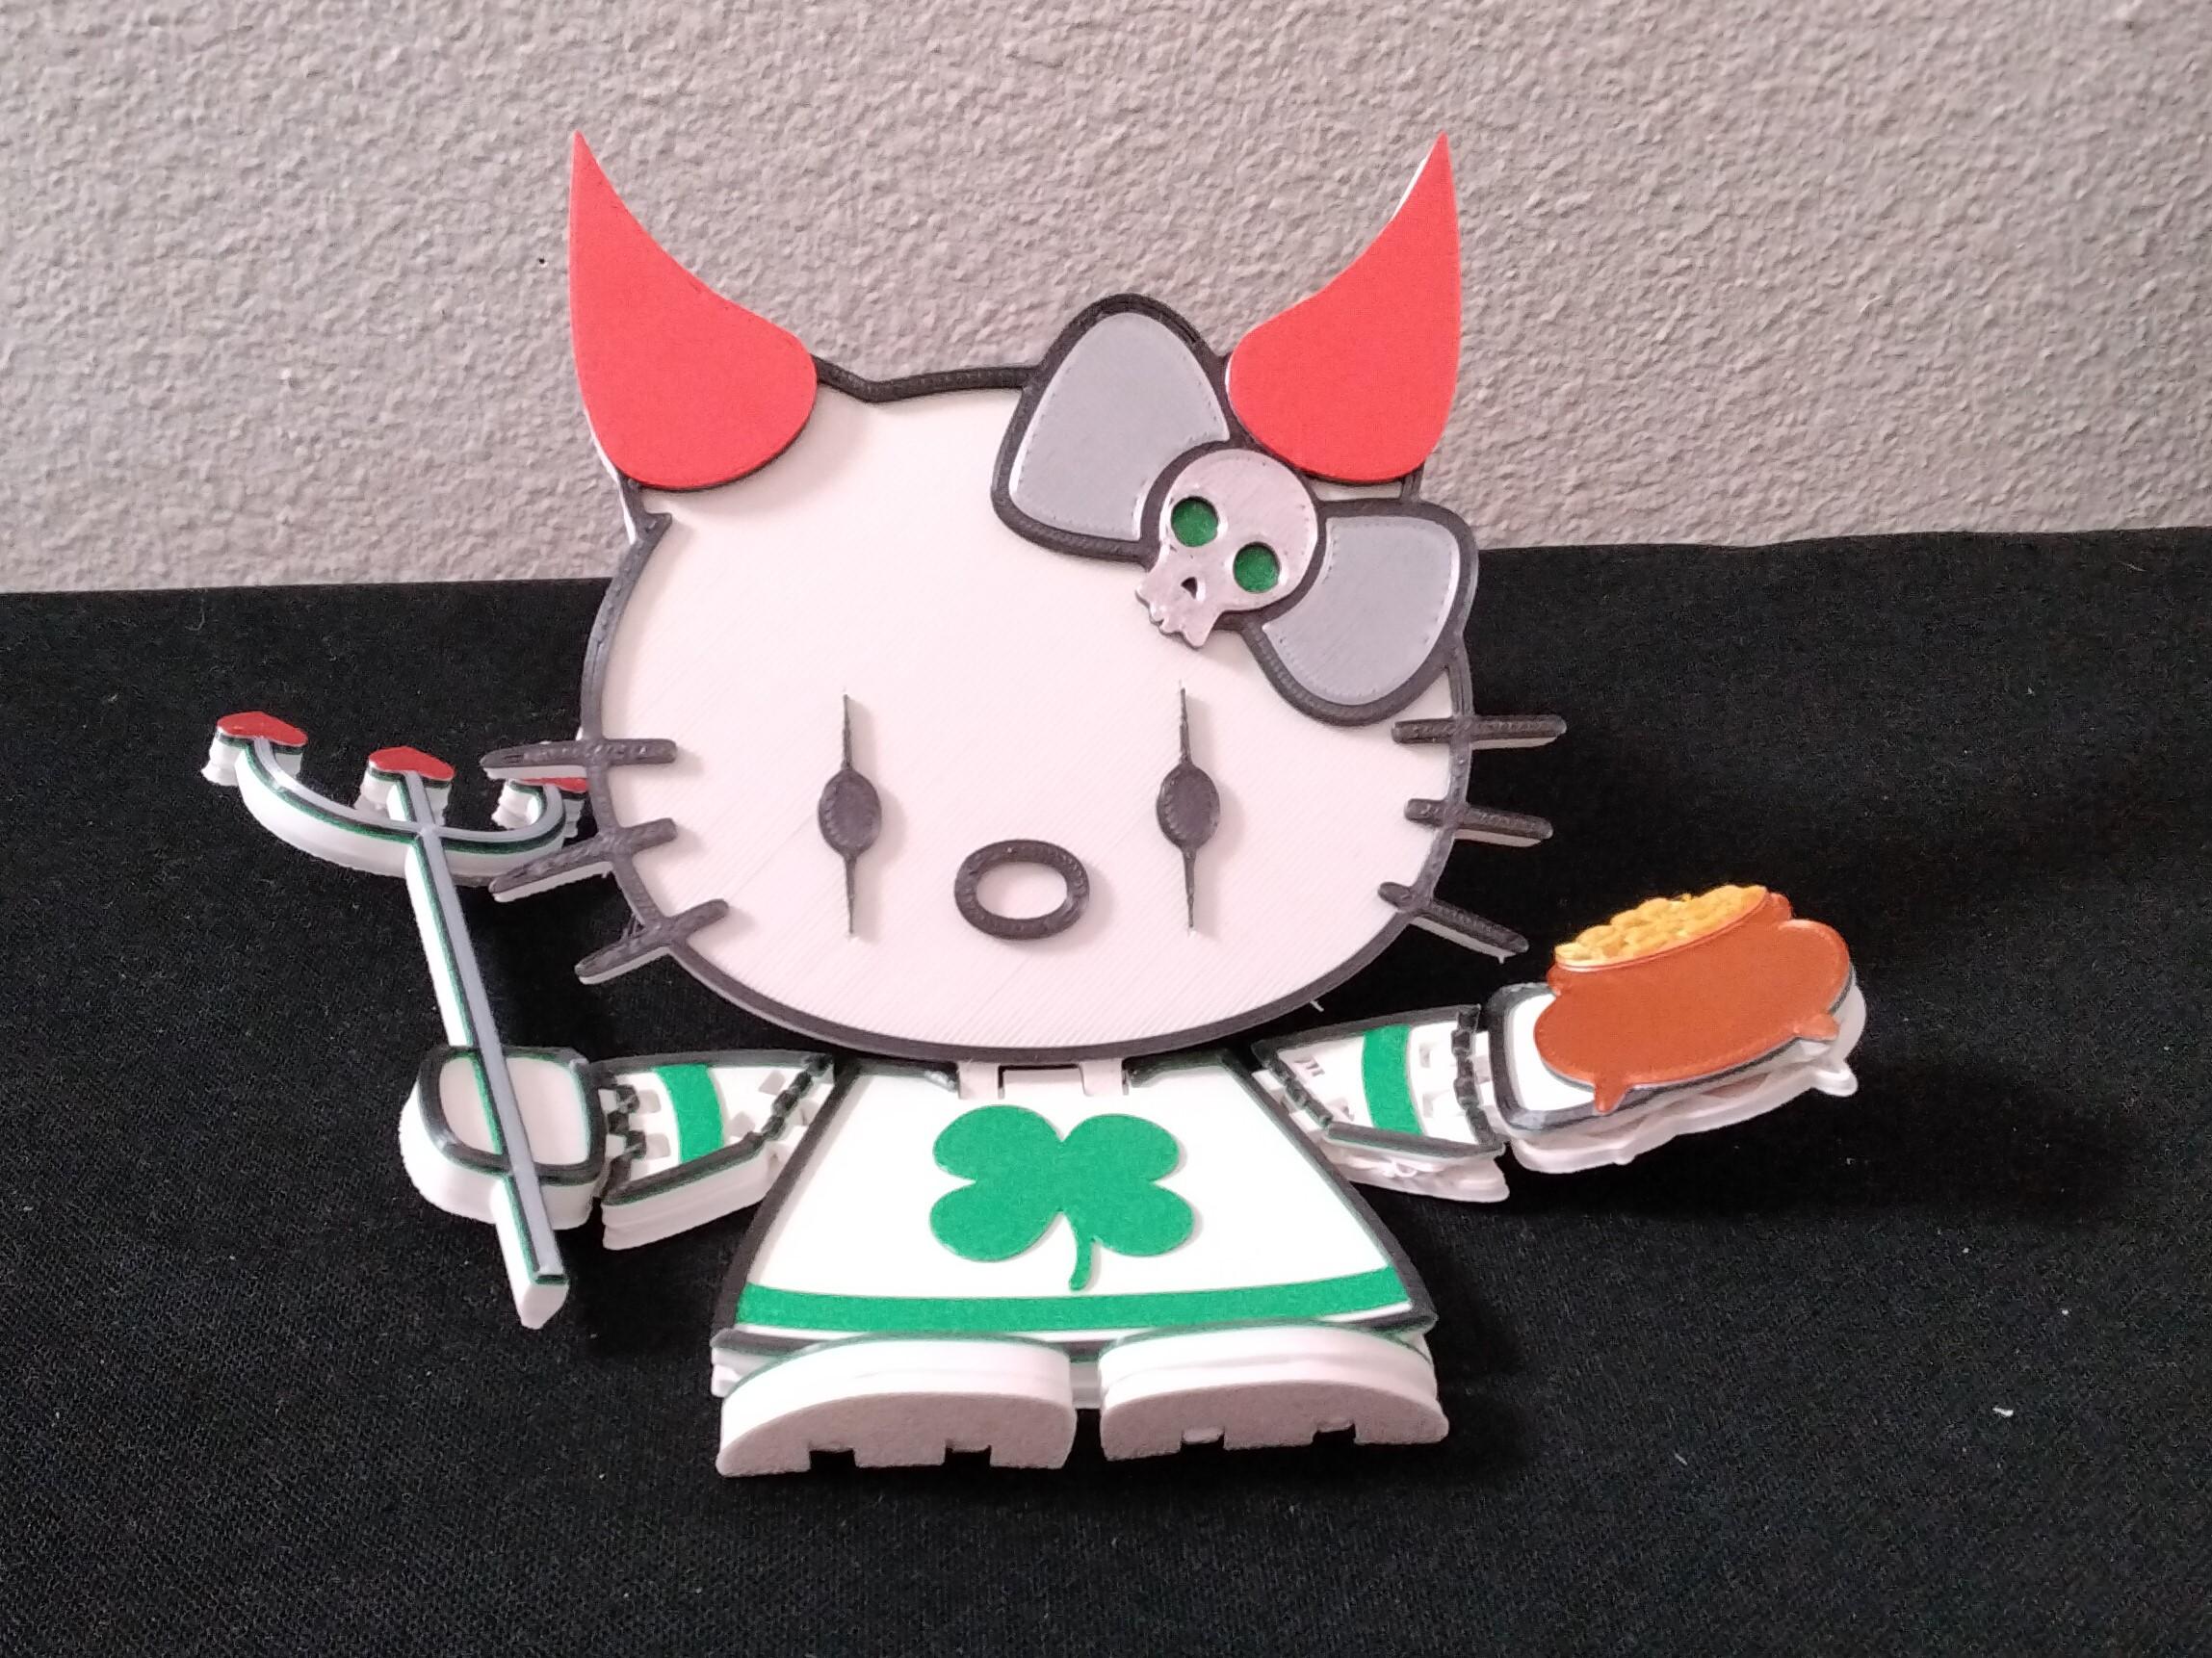 Hell O'Kitty articulating toy 3d model